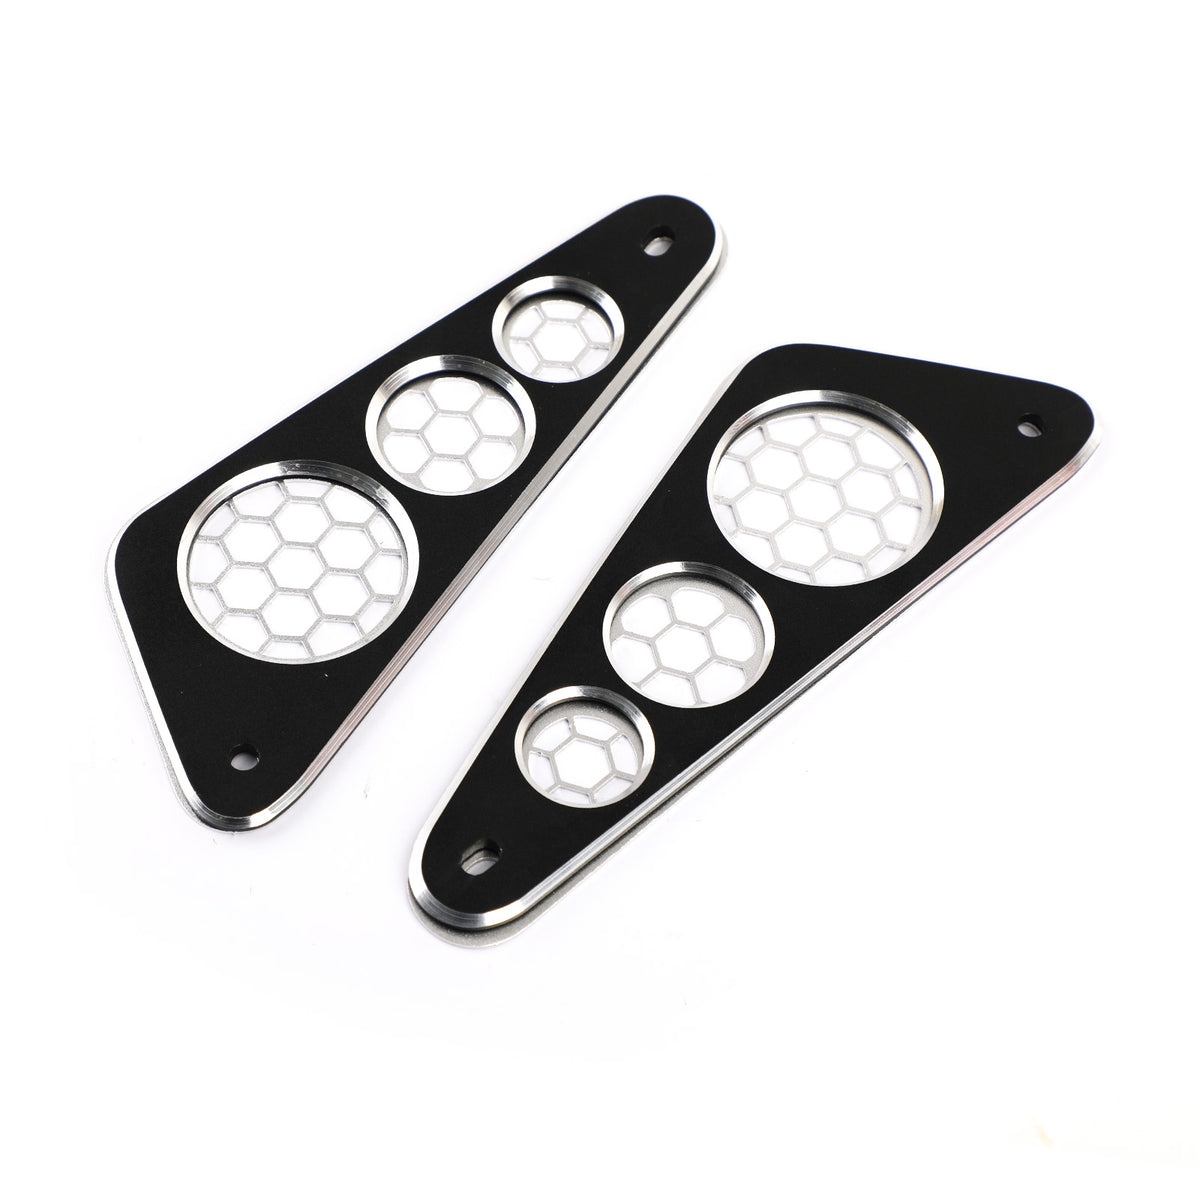 Rear Panel Guard Side Cover Plate Protector for YAMAHA XSR155 2019-2020 Black